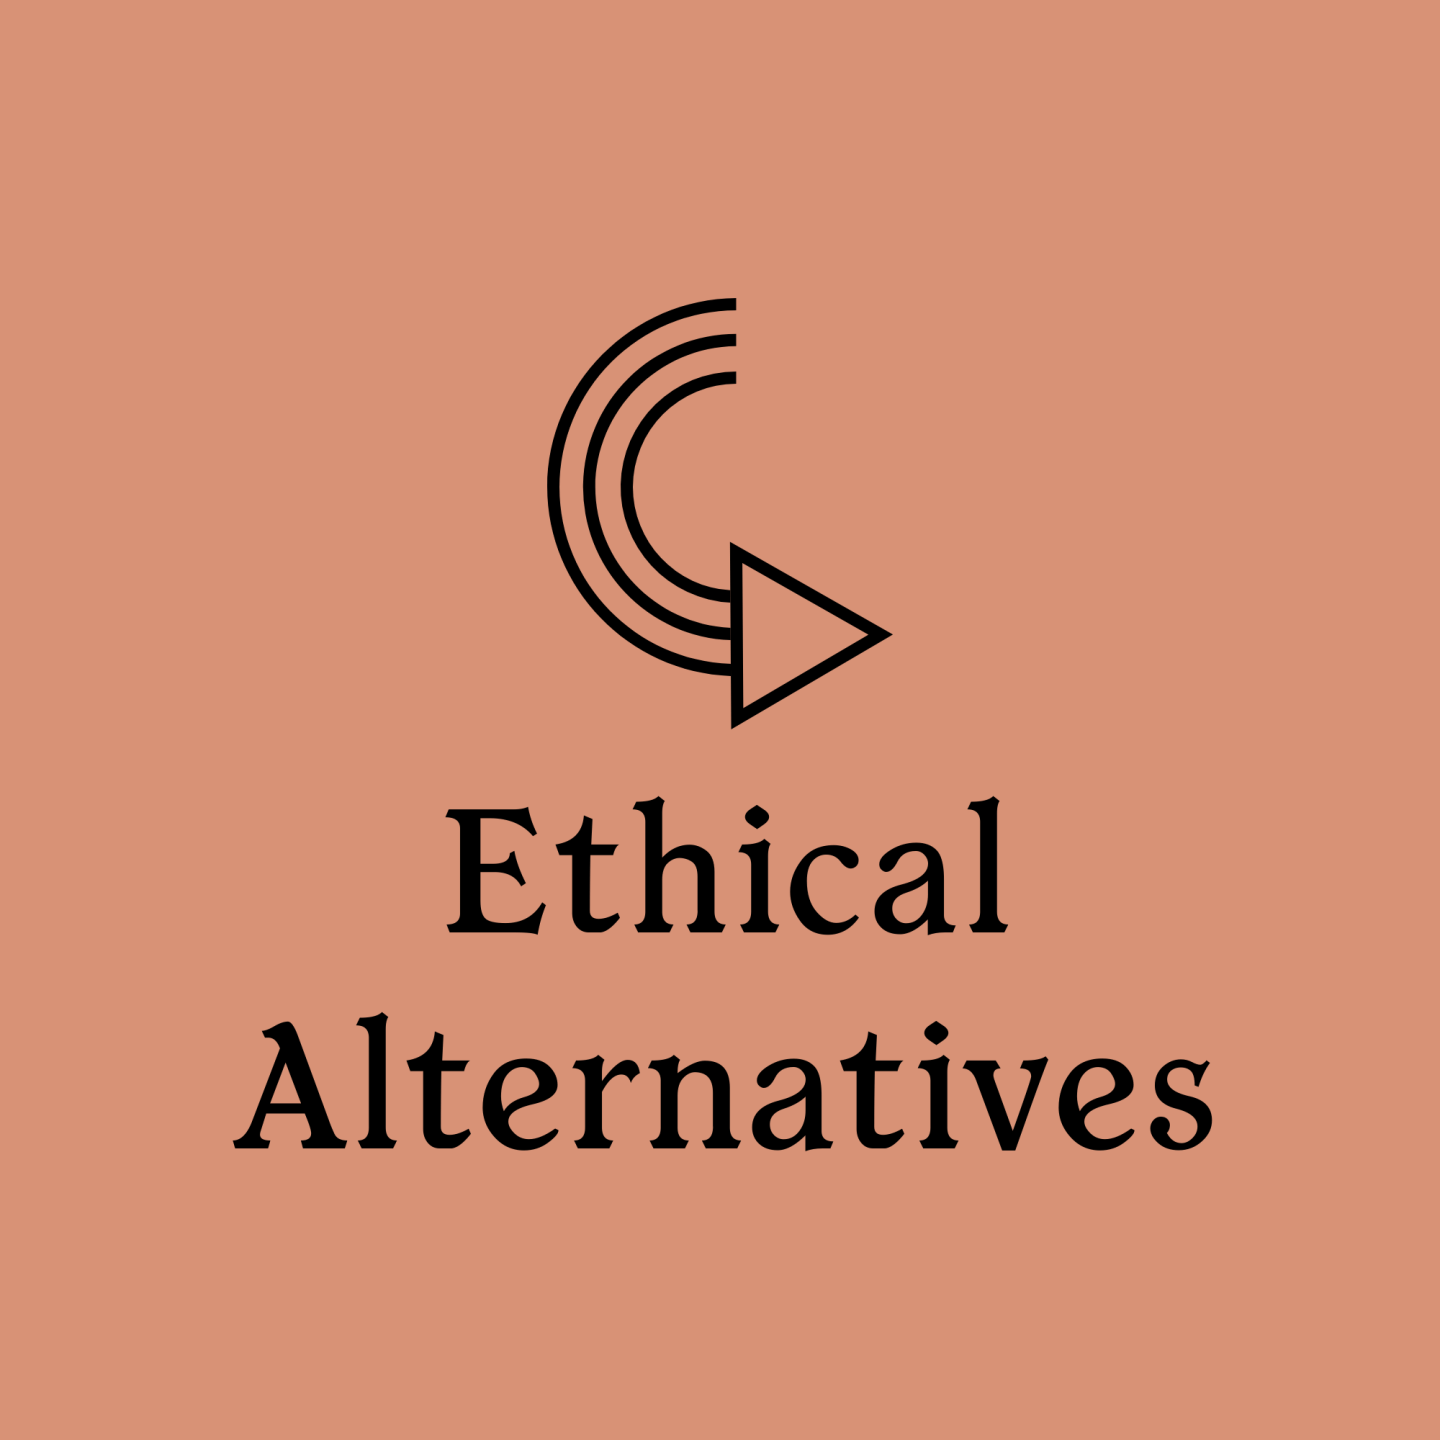 peach graphic with arrow image and text that reads "Ethical Alternatives"